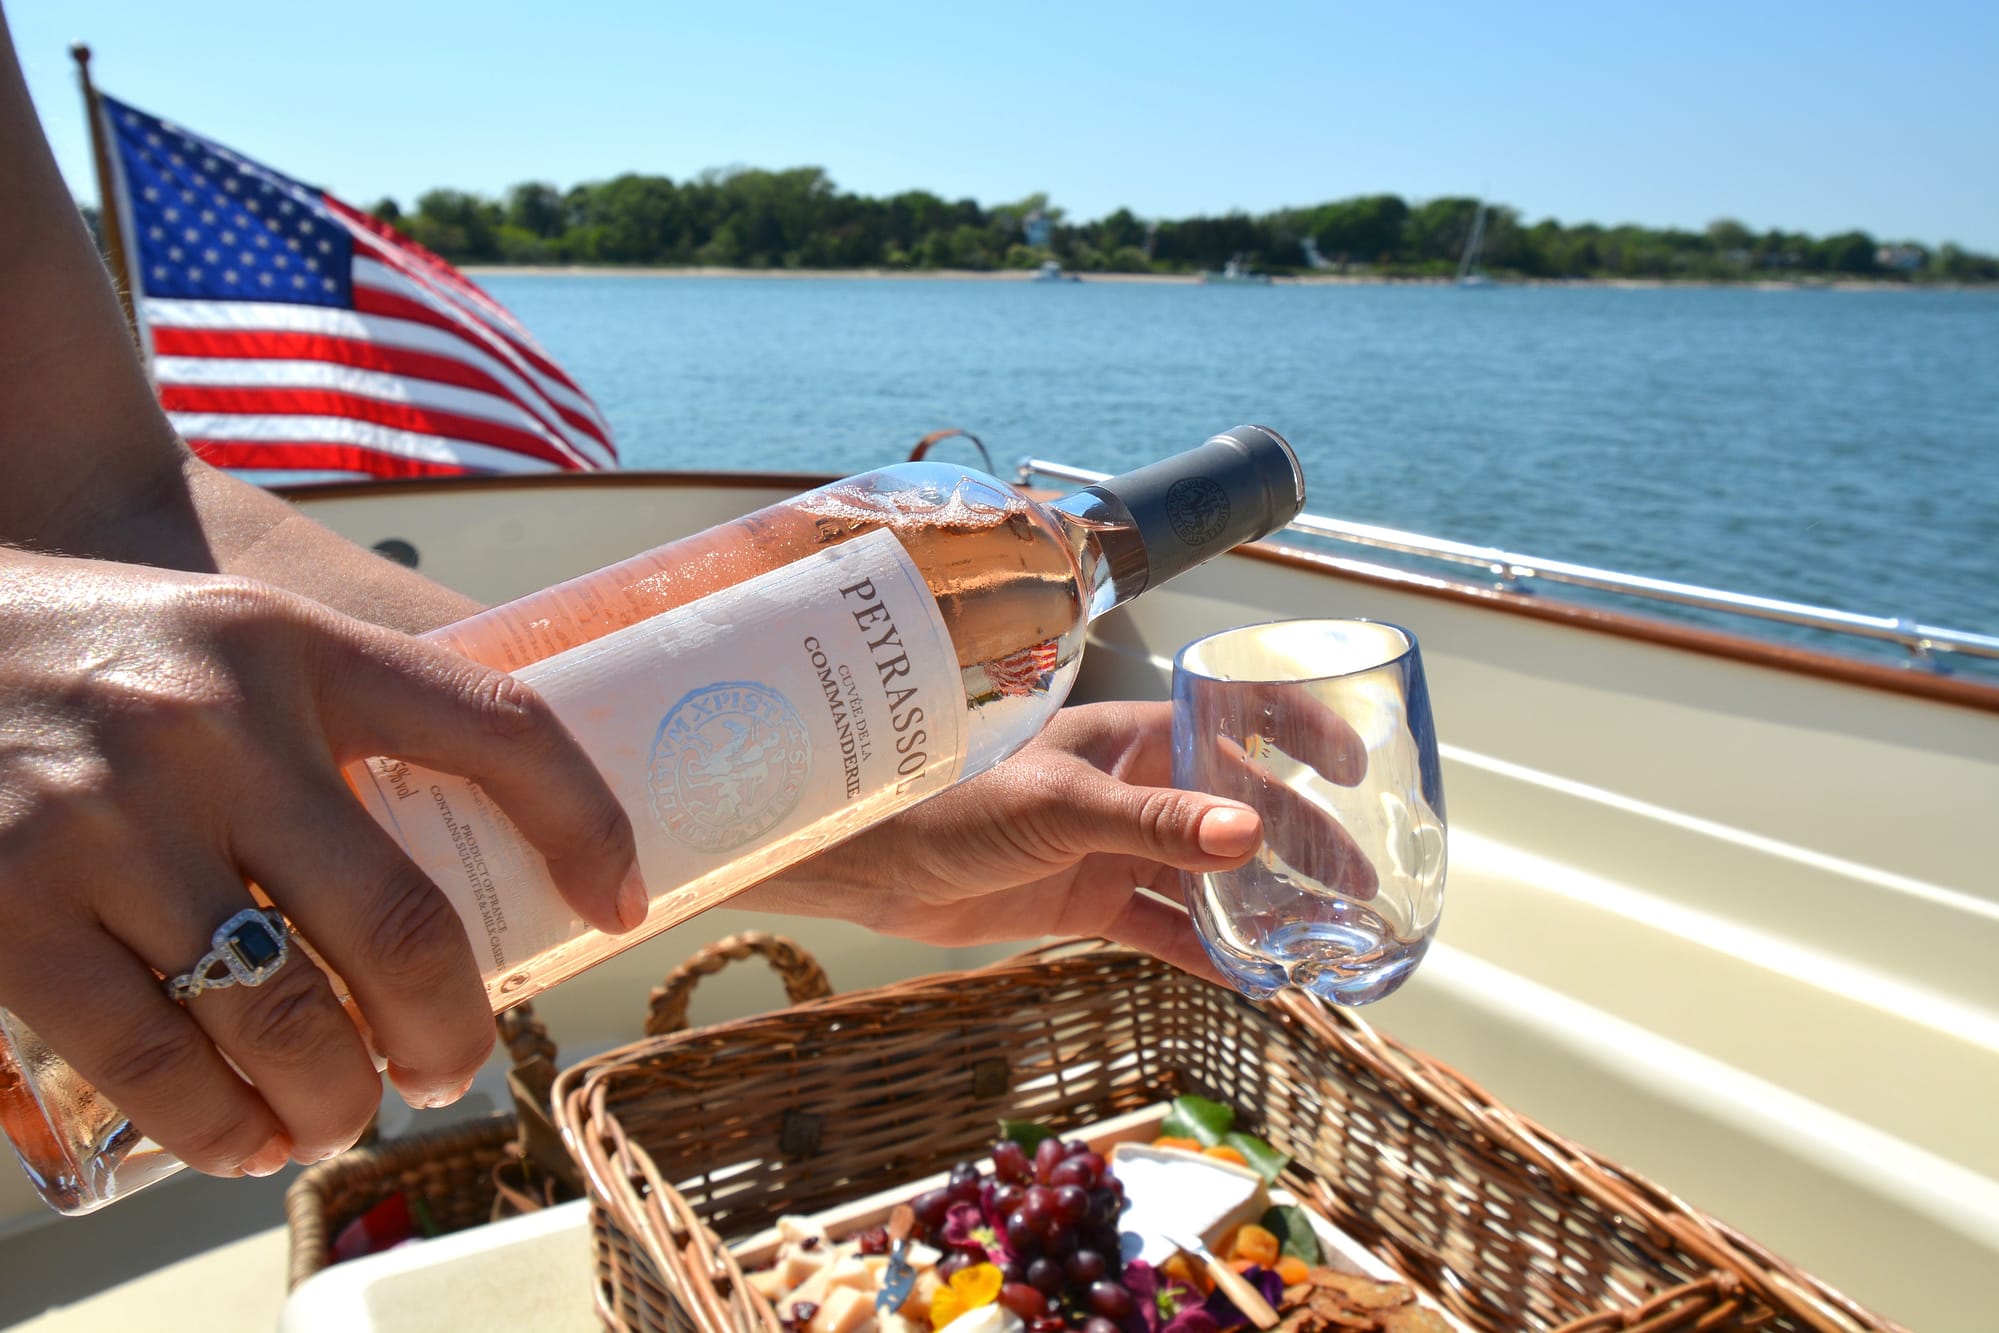 complementary rosé being served on Le Launch charter Siren.